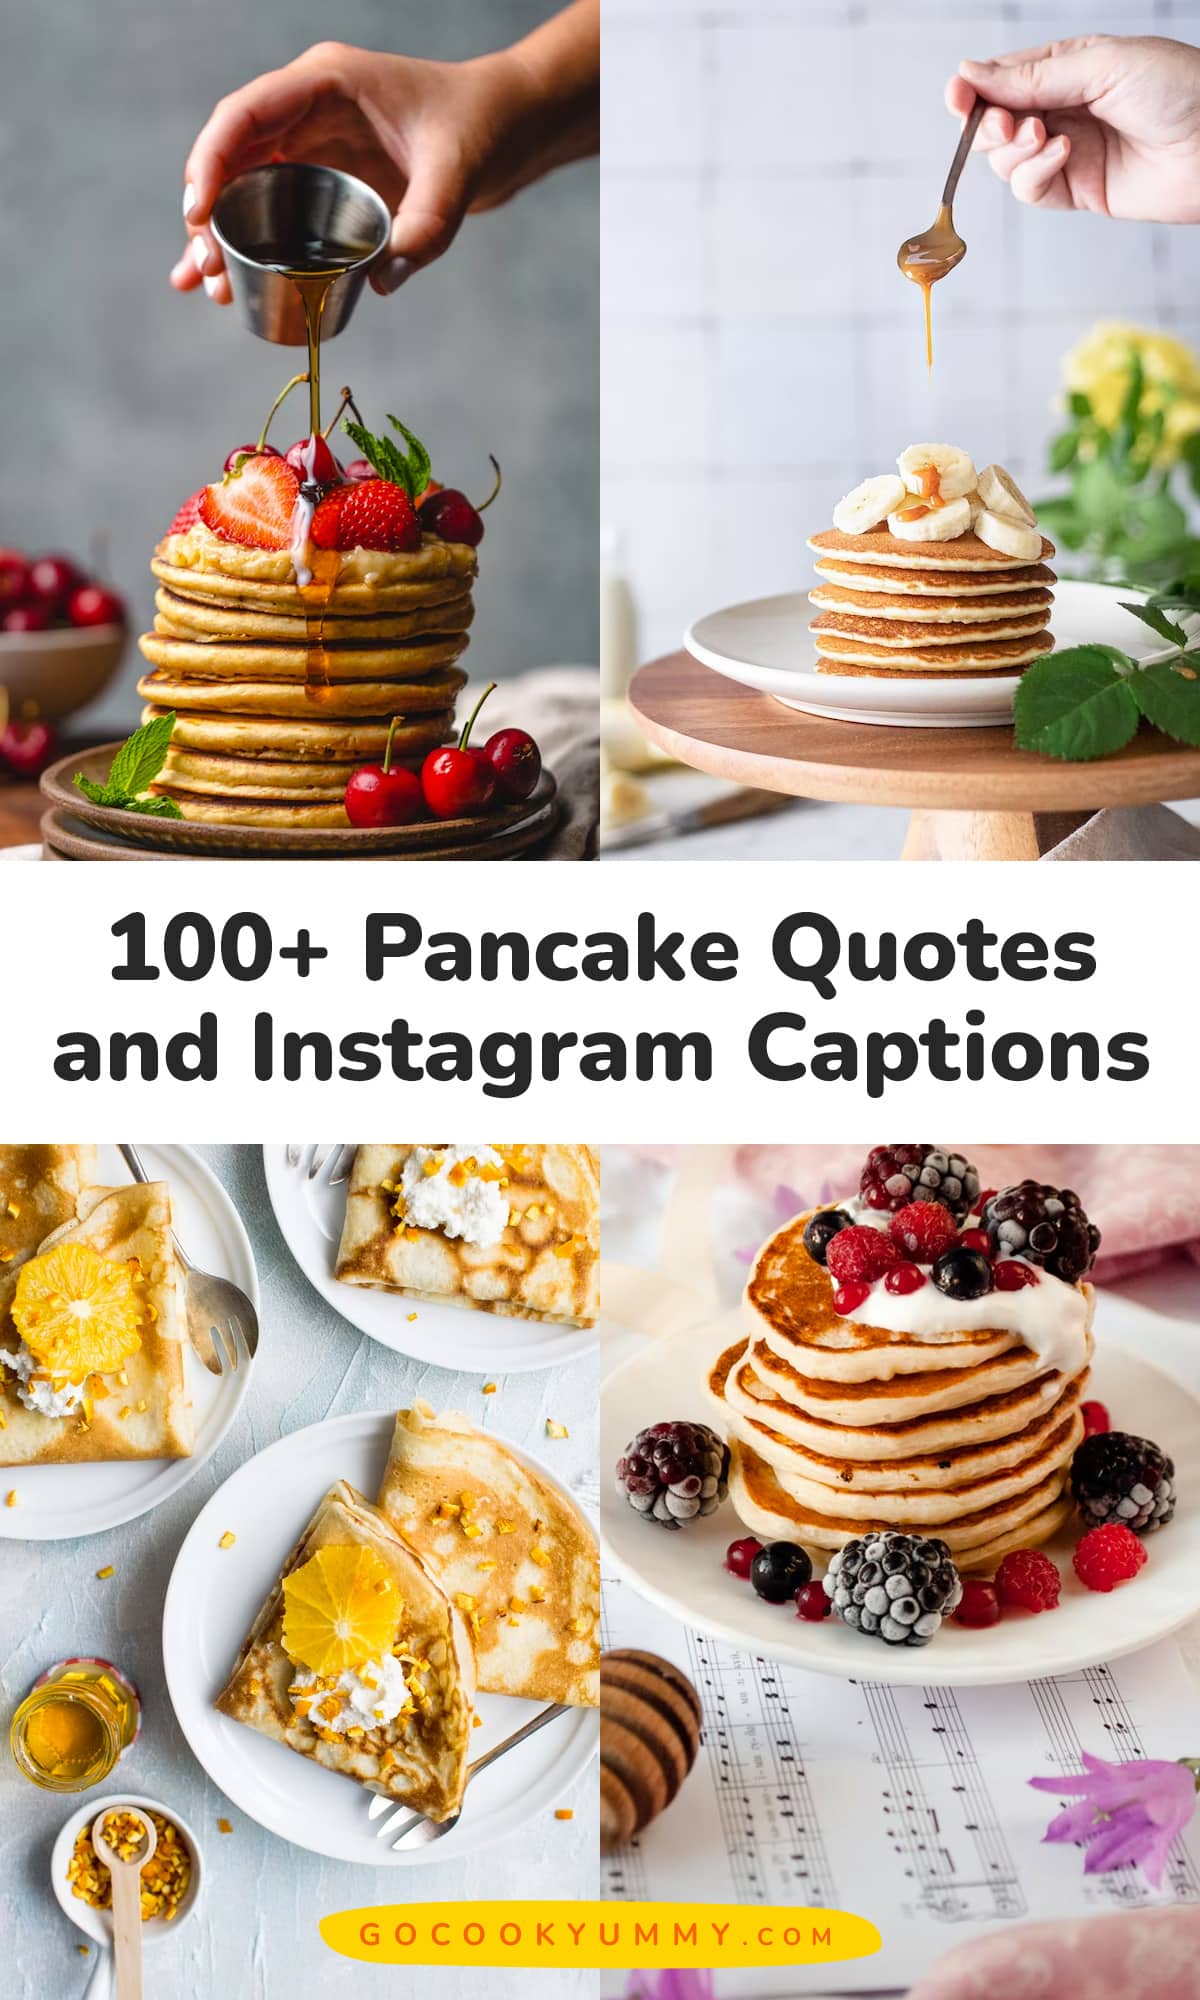 Best 100 Pancake Quotes and Instagram Captions.